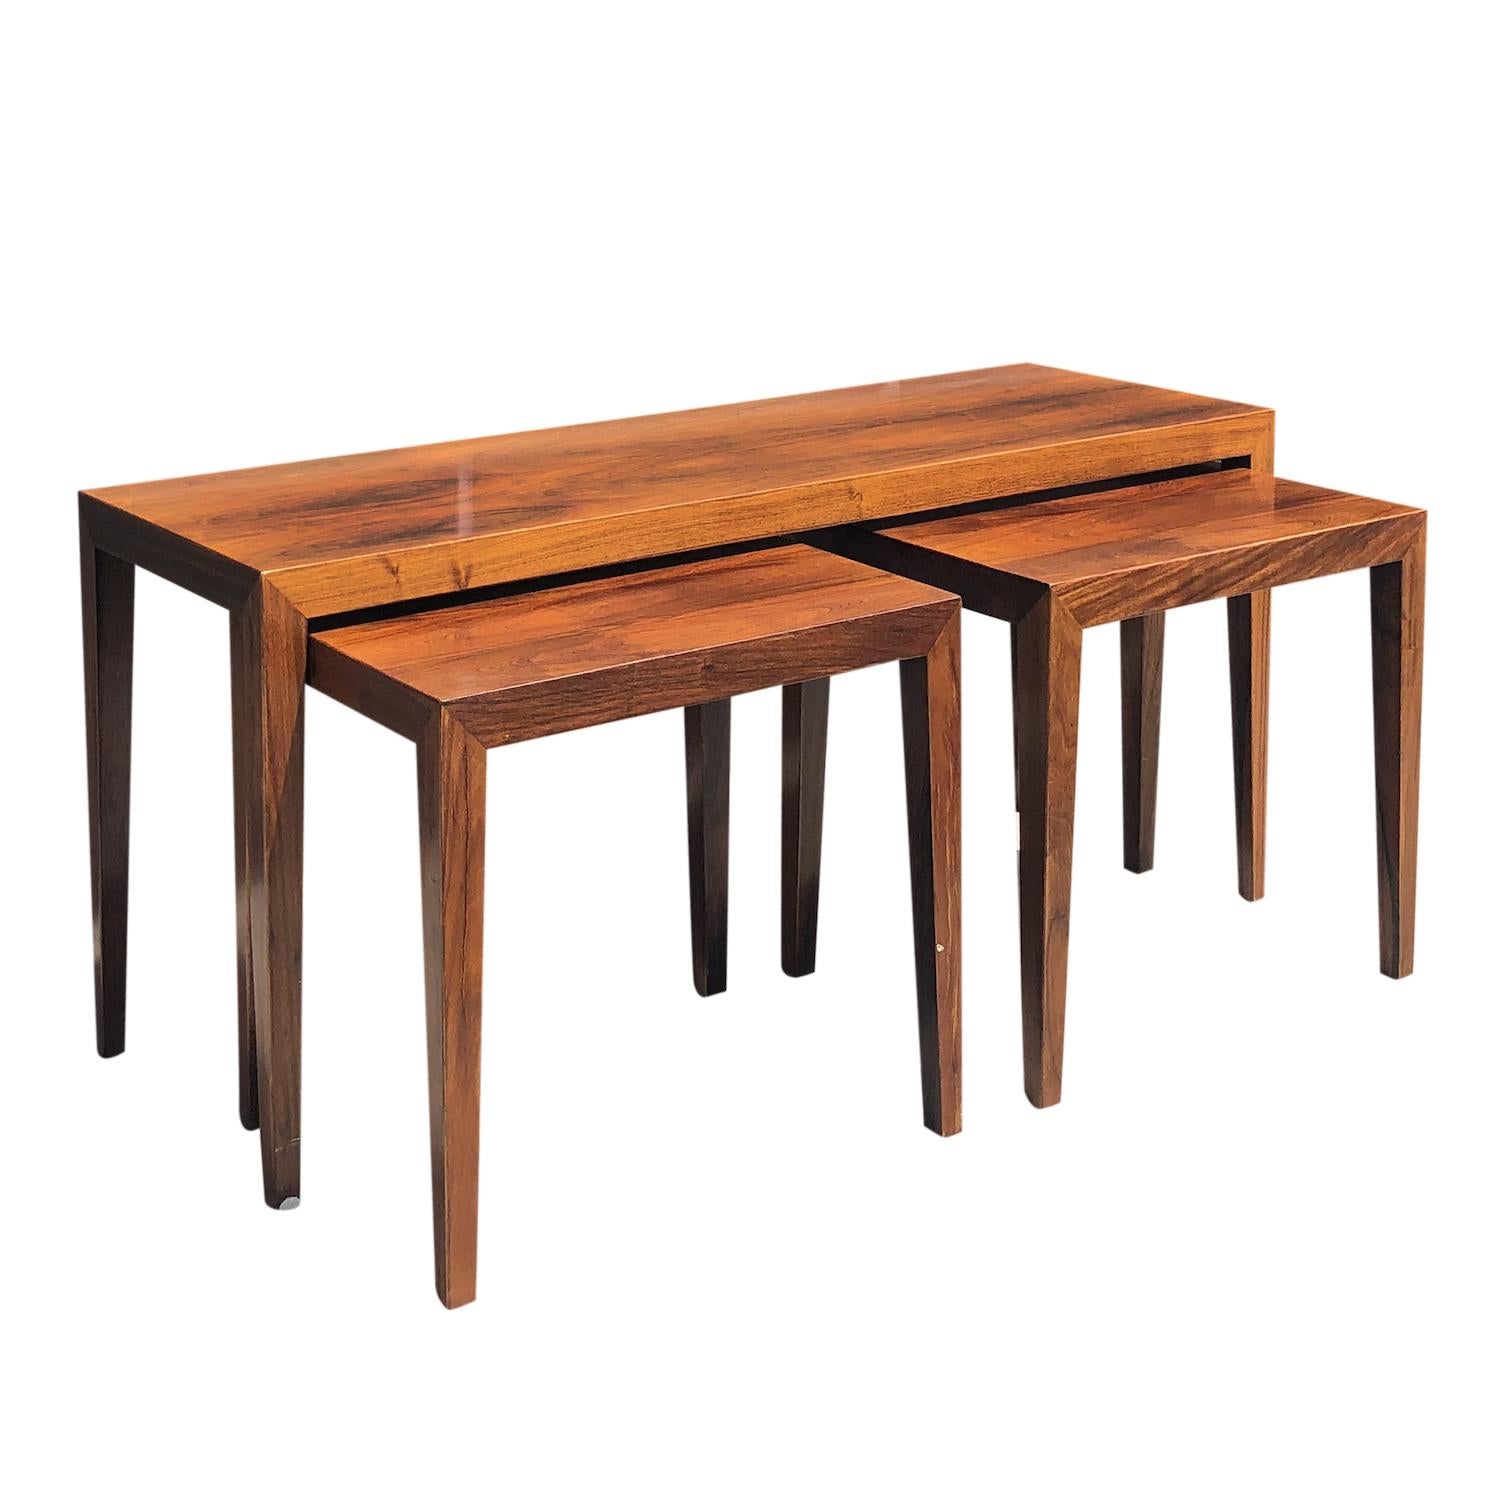 A vintage Mid-Century modern Danish nest of side tables made of hand crafted polished Rosewood designed by Severin Hansen and created by Haslev furniture factory, in good condition. Signed at the bottom. Wear consistent with age and use. Circa 1950